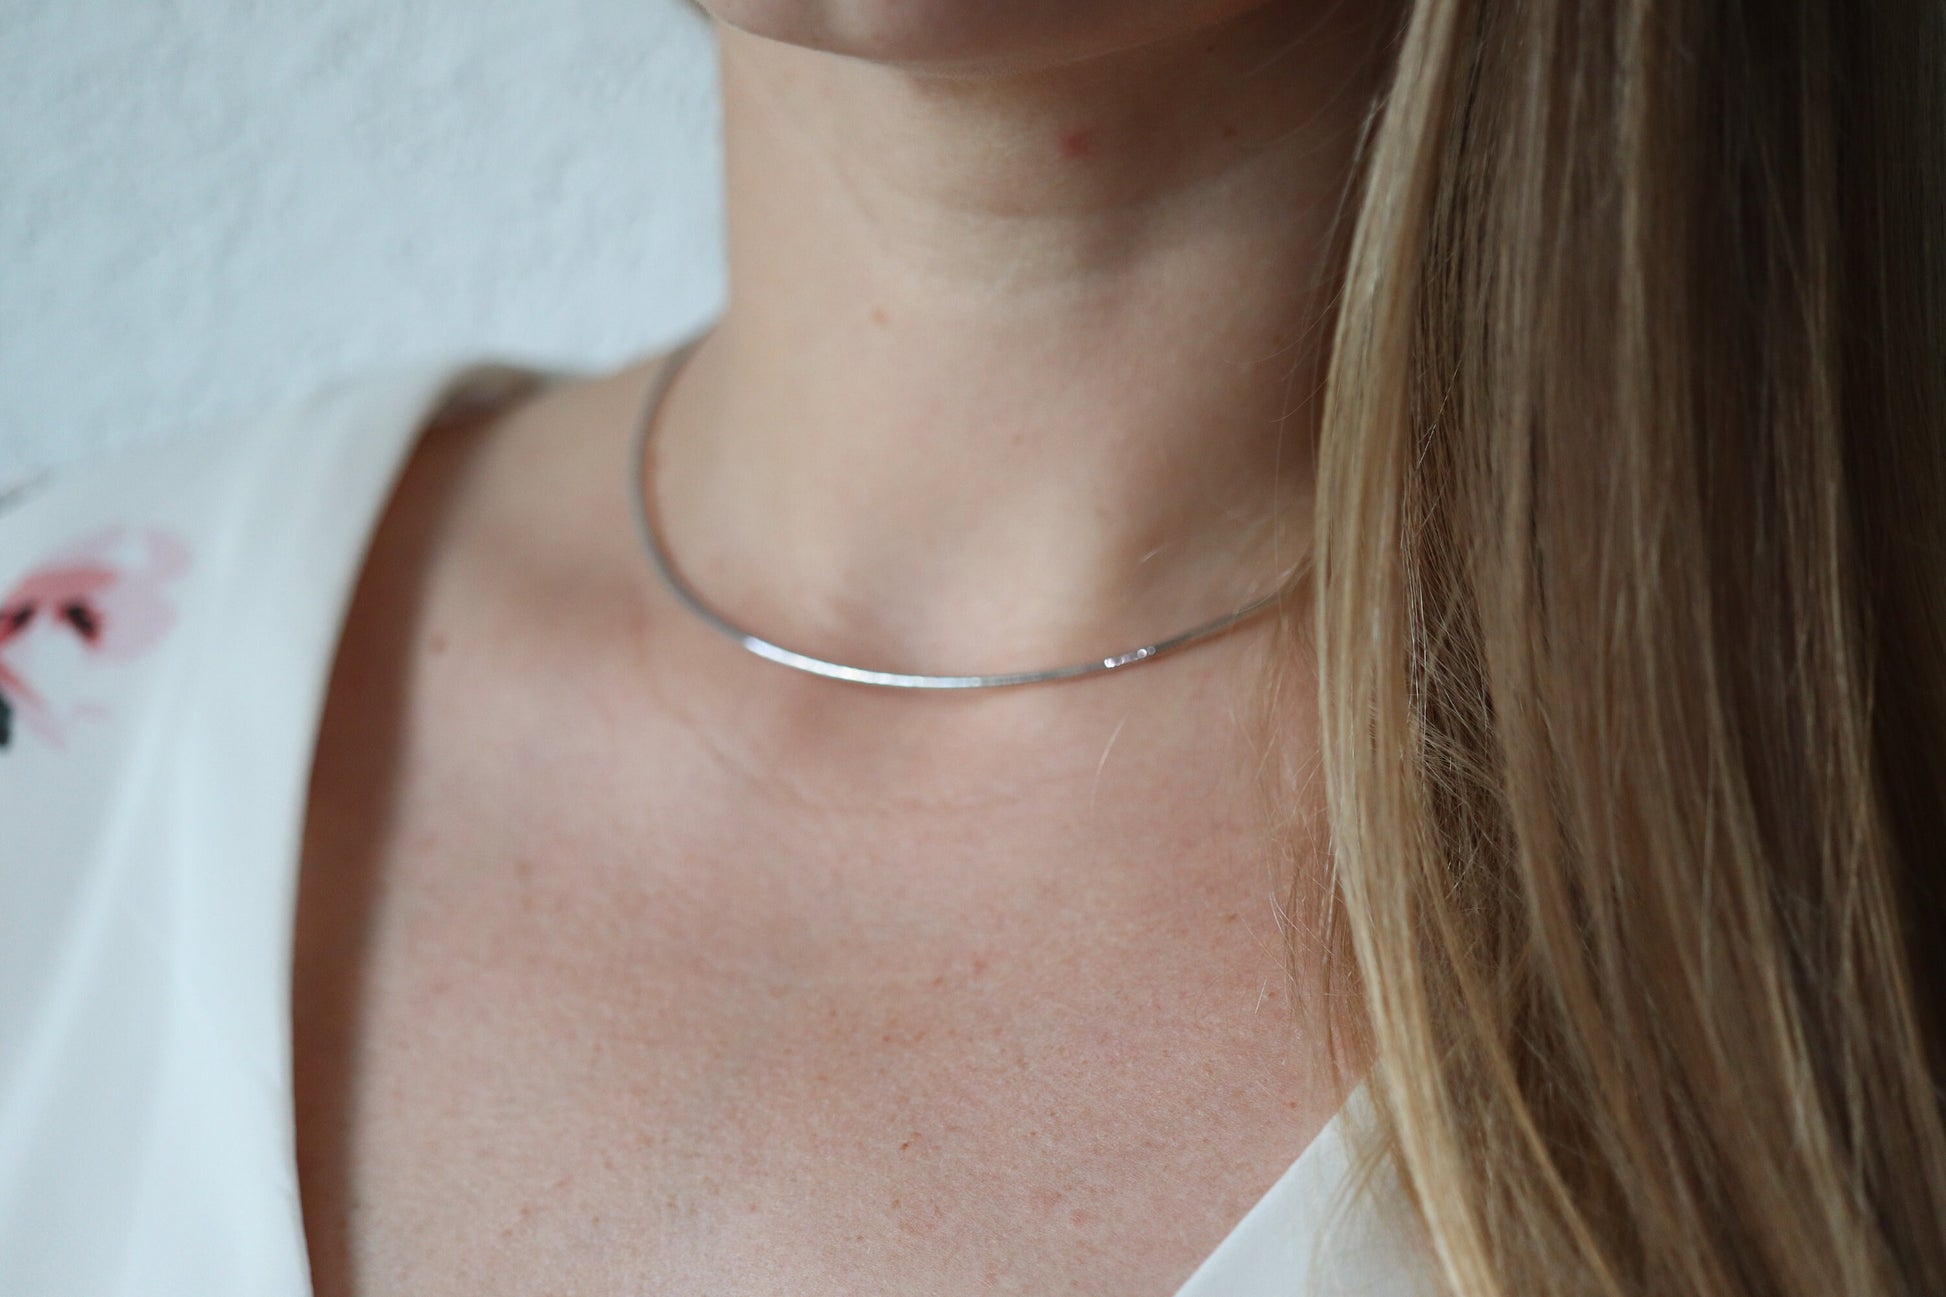 18k Round Omega Necklace. 18k White White Gold OMEGA Snake chain Necklace. MILOR 1.5mm 16in length. Choker Collar necklace.